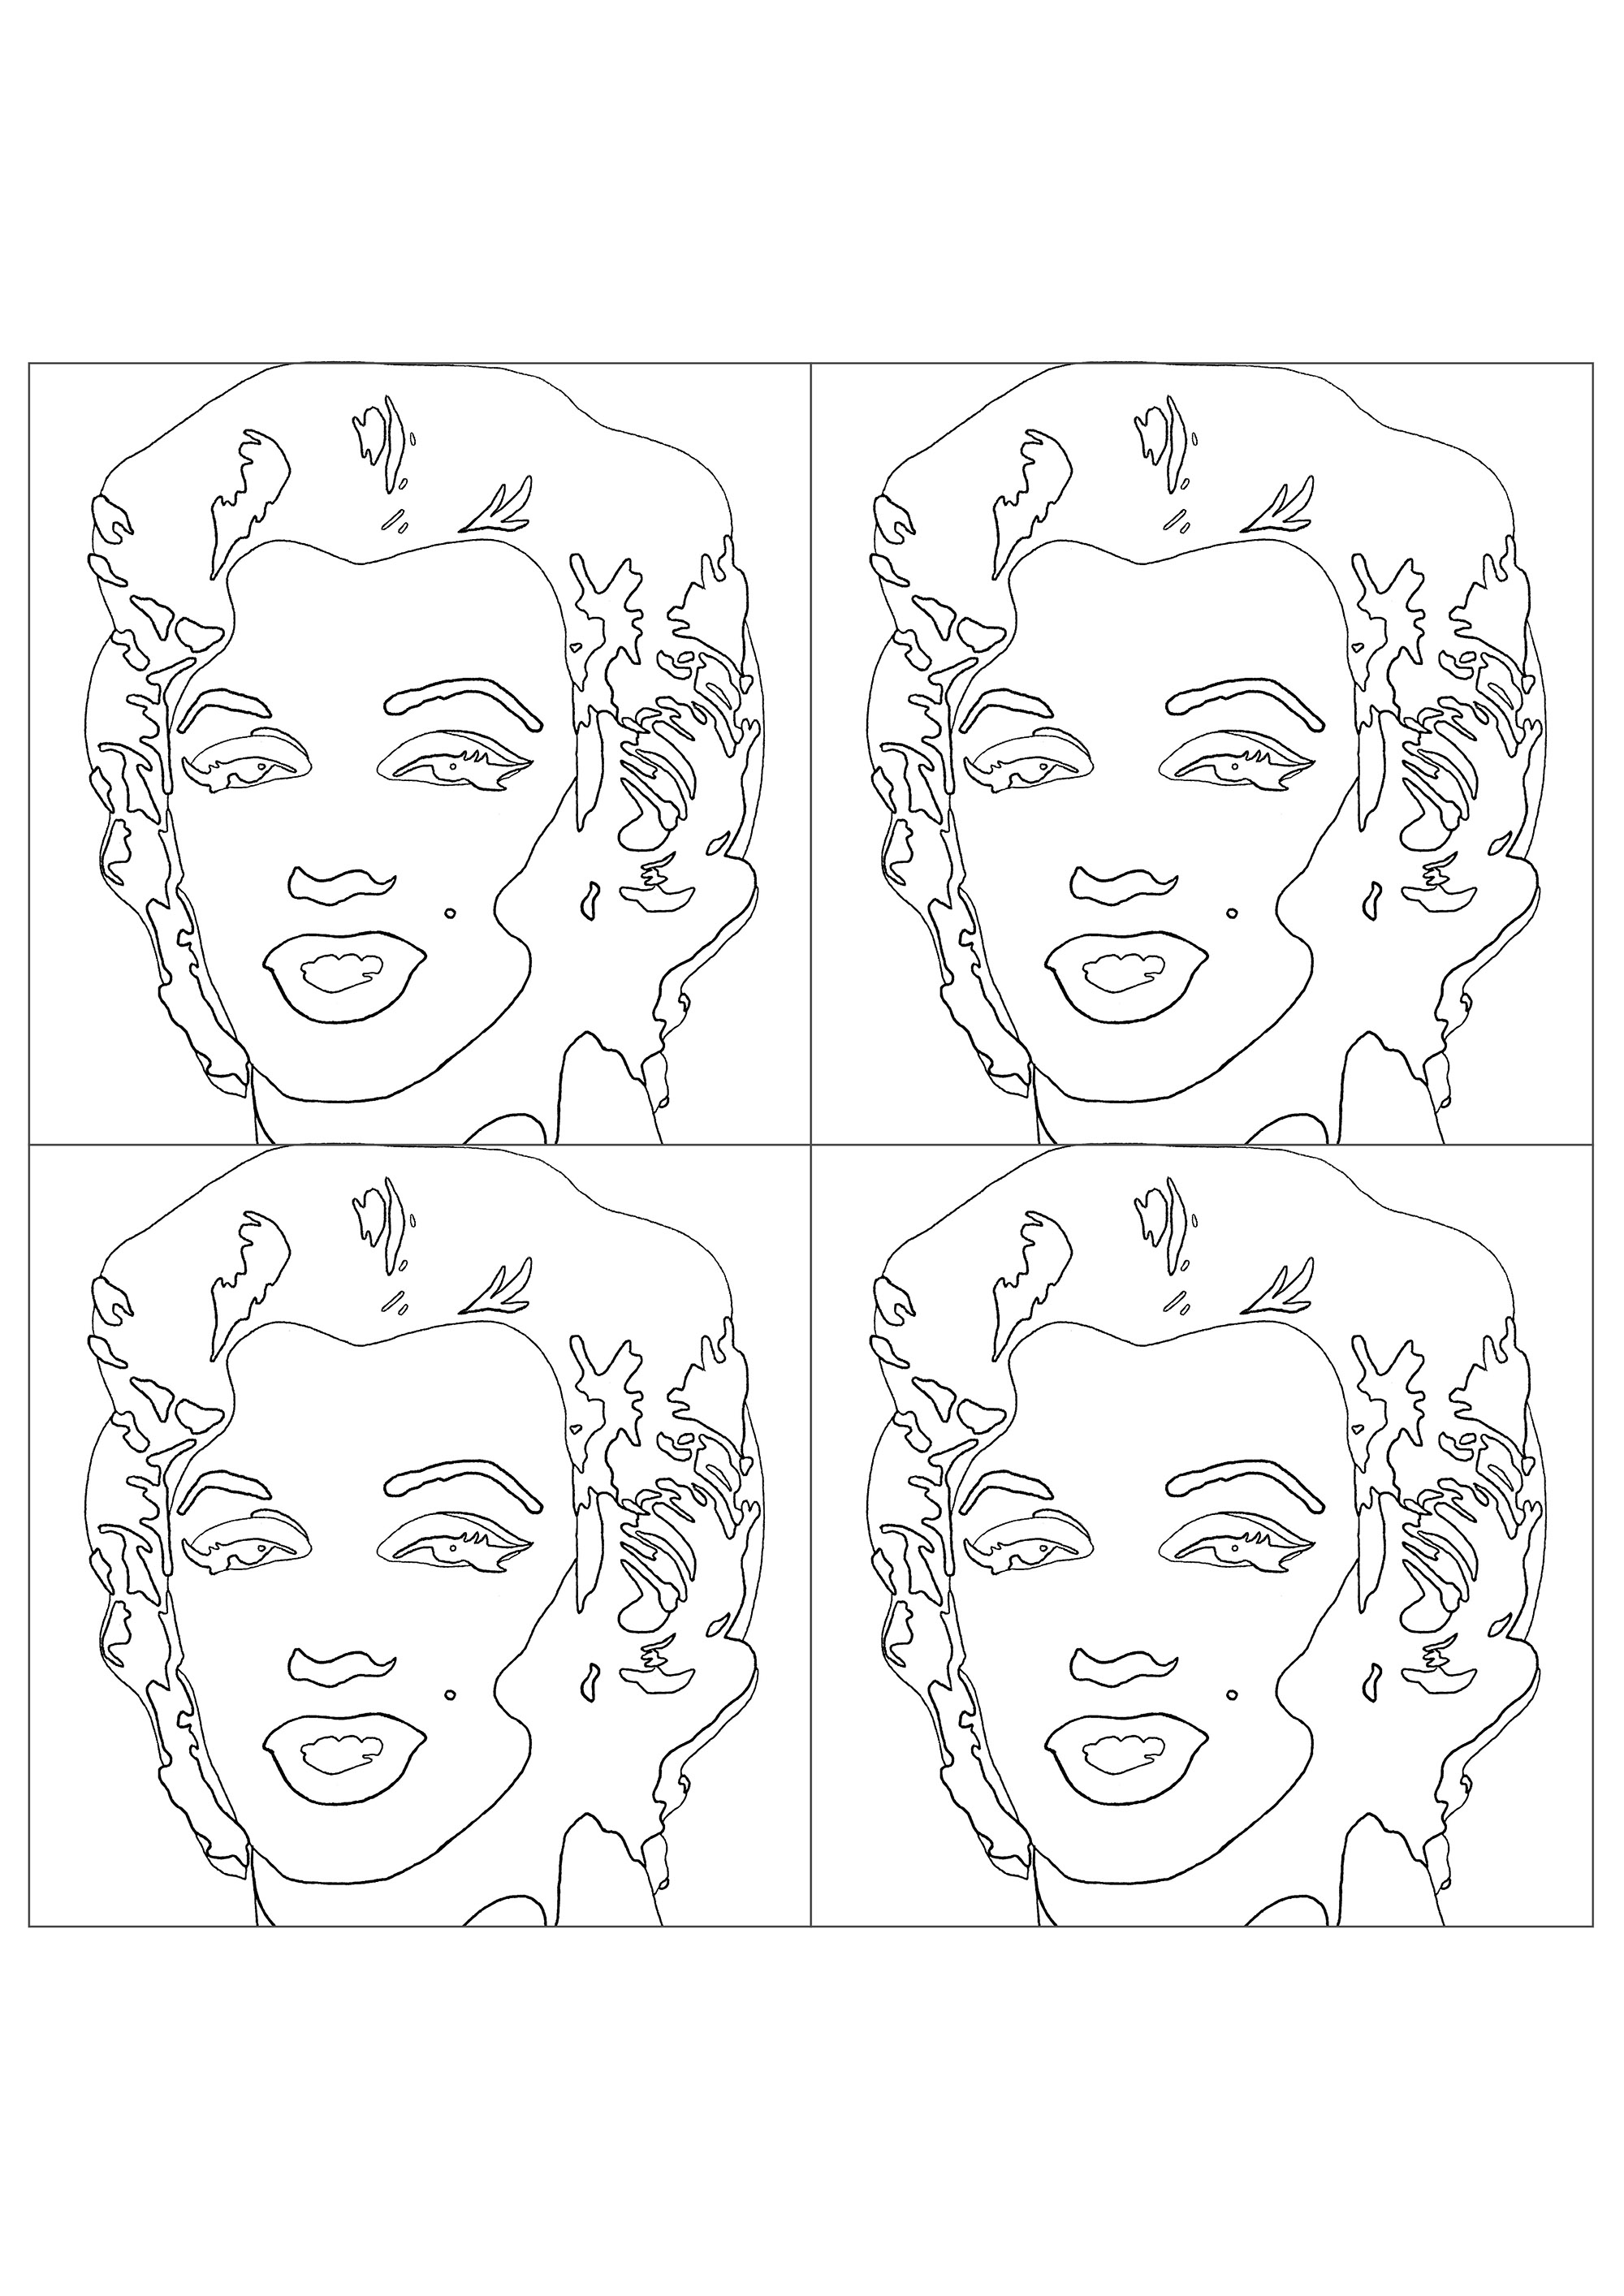 Andy Warhol - Shot Sage Blue Marilyn (version with four portraits) - Pop  Art Adult Coloring Pages